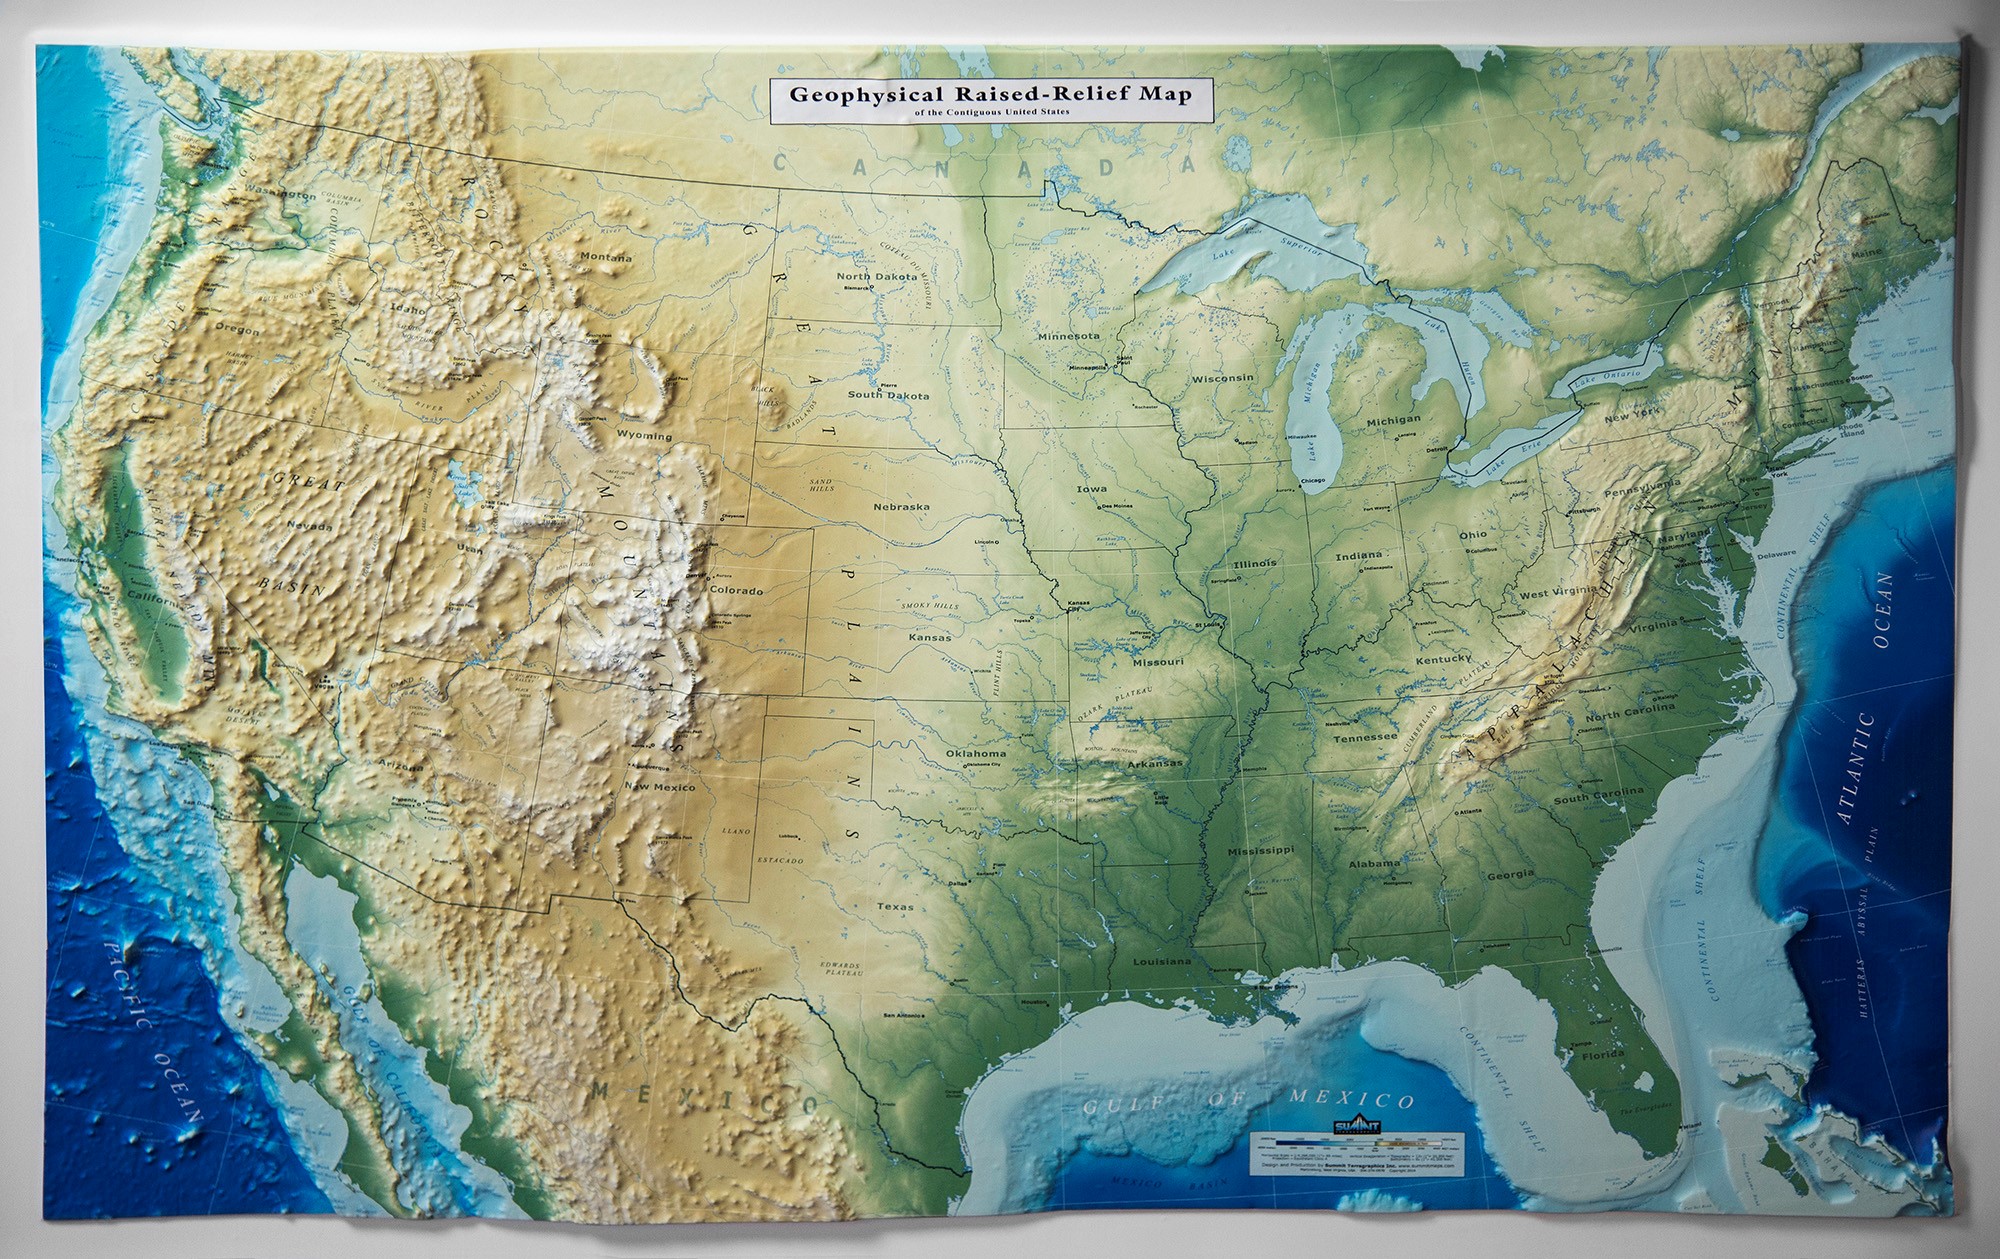 US Geophysical Raised Relief Map DSC 2667 2 